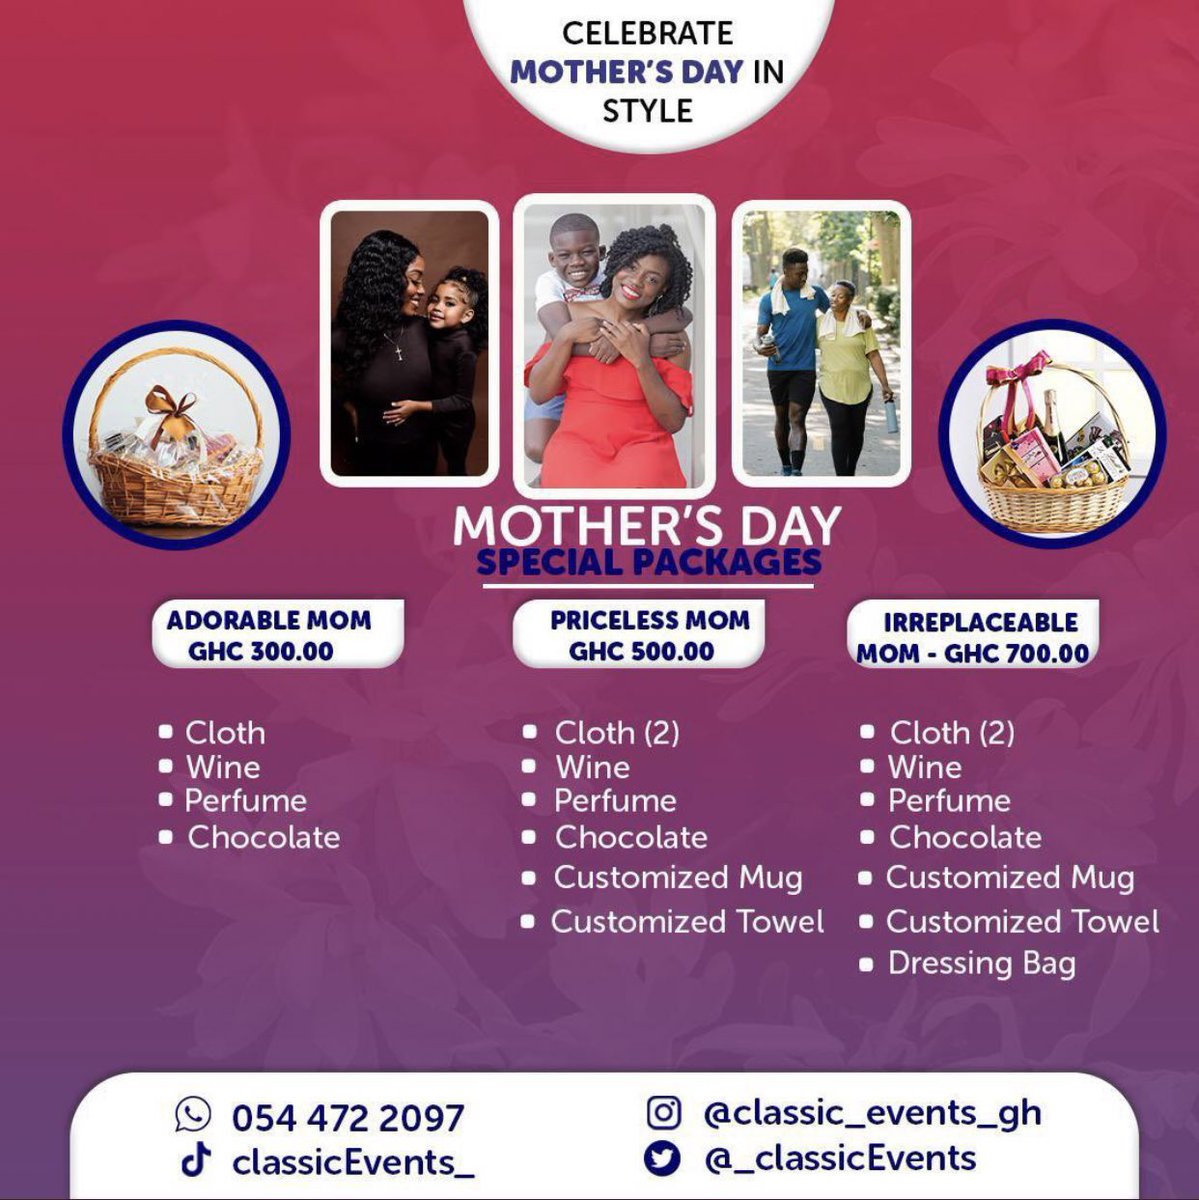 Treat your mom special.  It's her day
Contact @_classicEvents